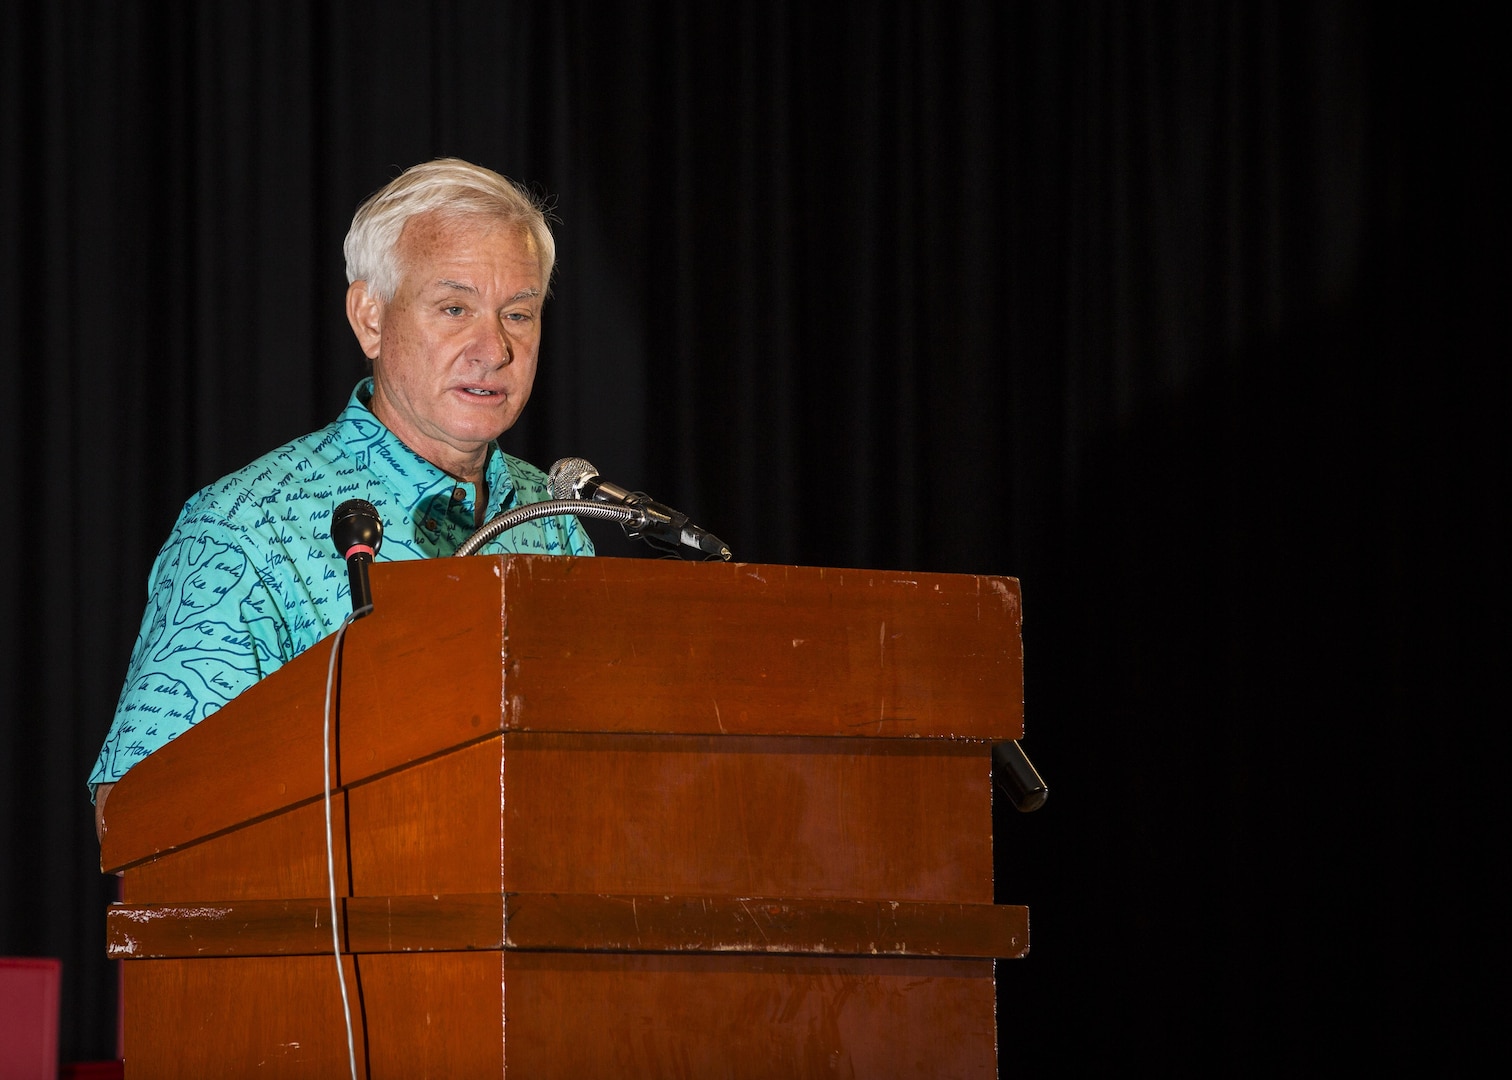 Mayor Kirk Caldwell, City & County of Honolulu, speaks during the First Responder Recognition Ceremony at the Neal S. Blaisdell Center, in Honolulu, Dec. 18, 2015. The first responders aided in the rescue and treatment of the crew and passengers of a 15th Marine Expeditionary Unit MV-22 Osprey tilt-rotor aircraft, which suffered a mishap at Marine Corps Training Area Bellows on May 2015. 